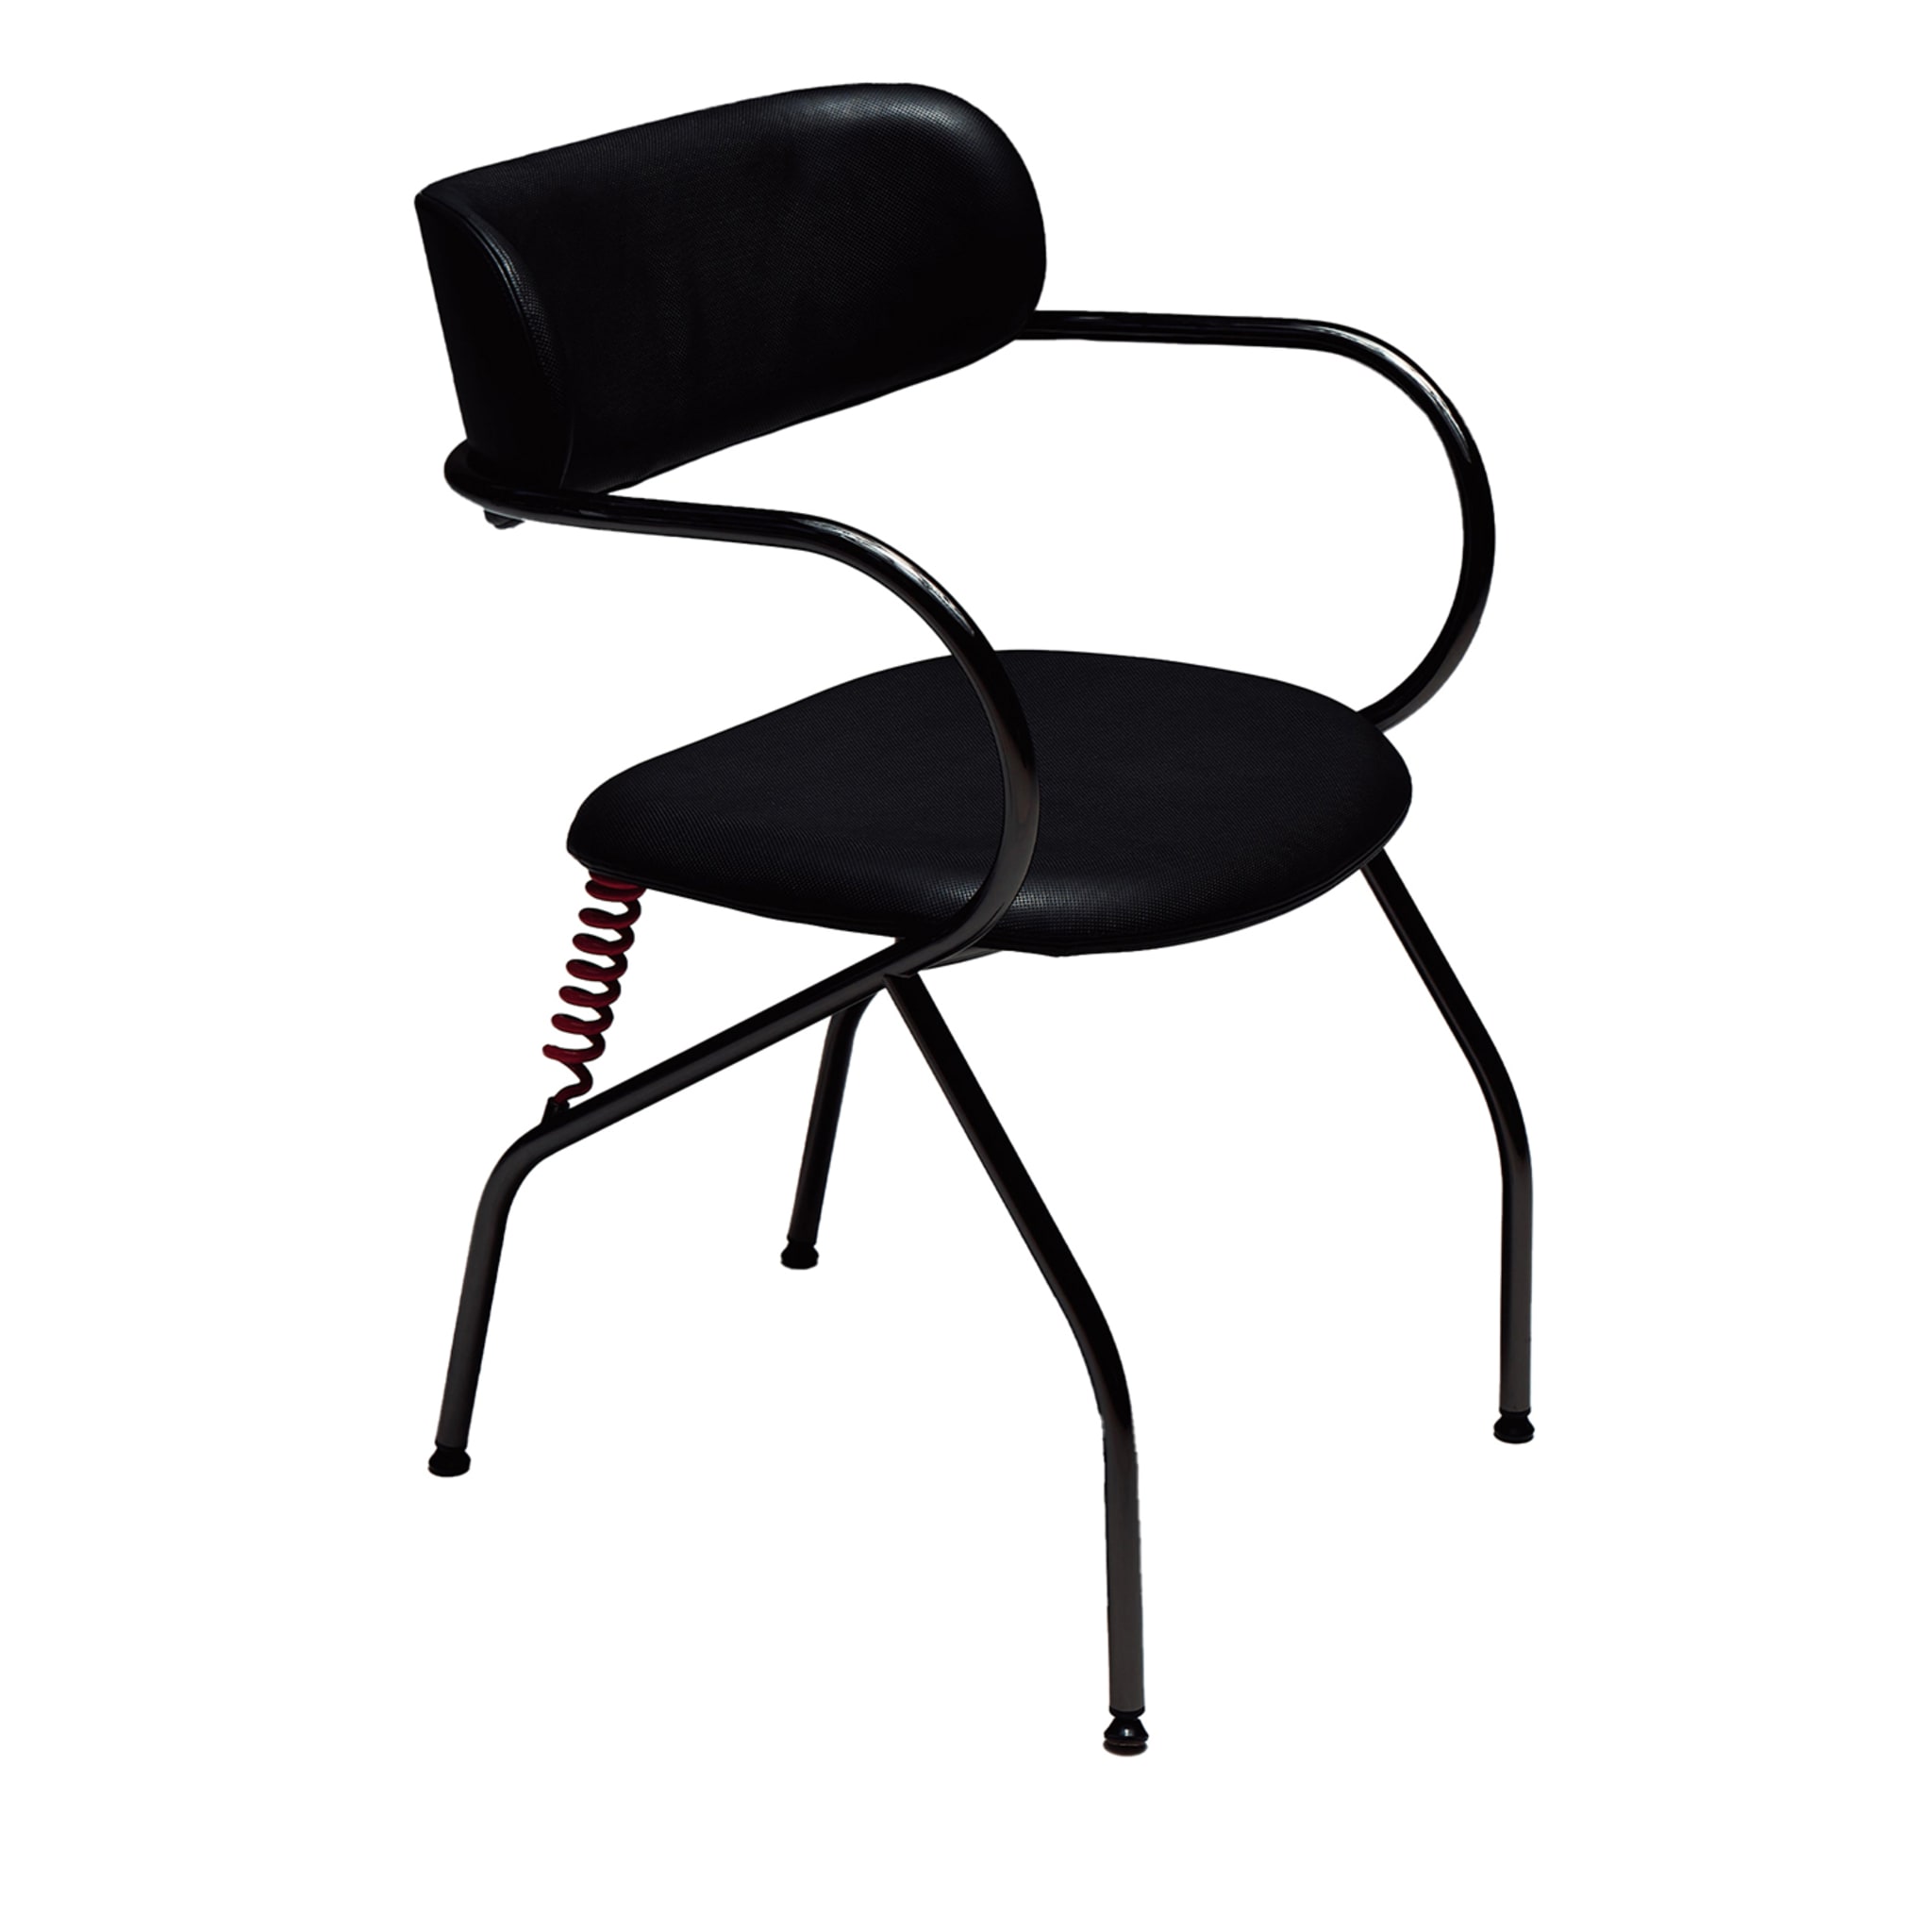 Spring Black Chair by Front - Vue principale